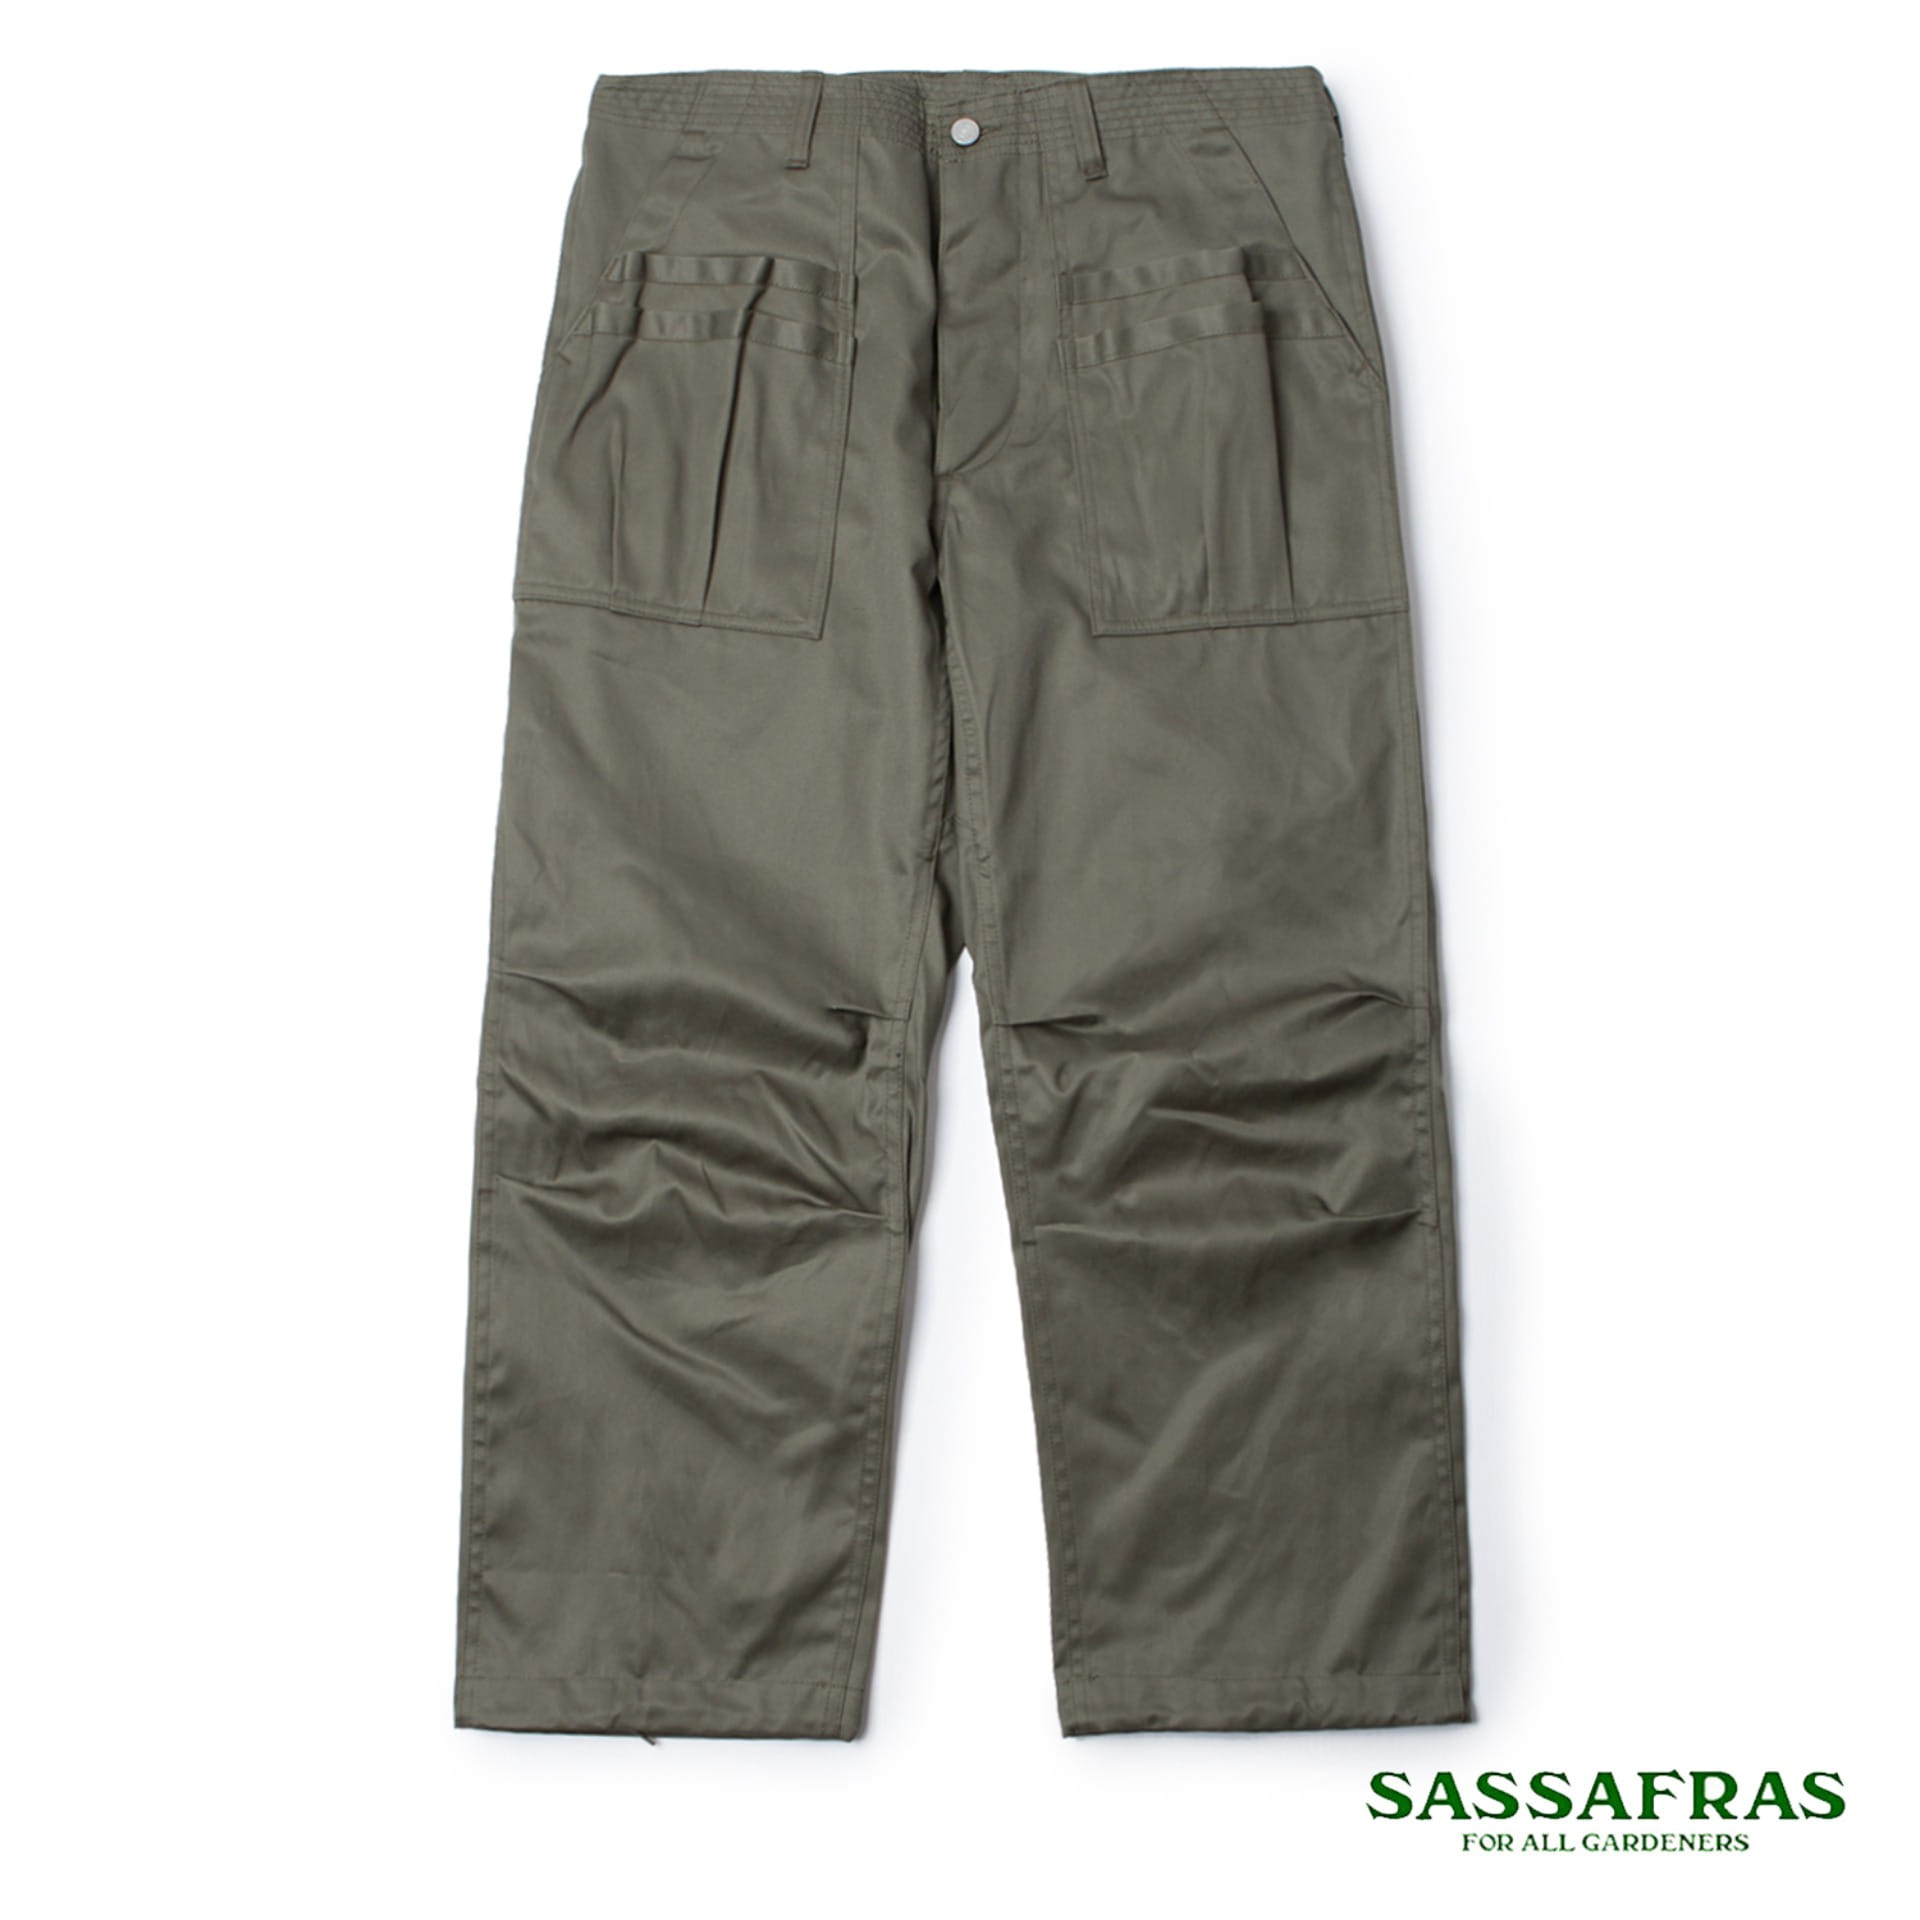 WEST POINT OVERGROWN FATIGUE PANTS (Olive)